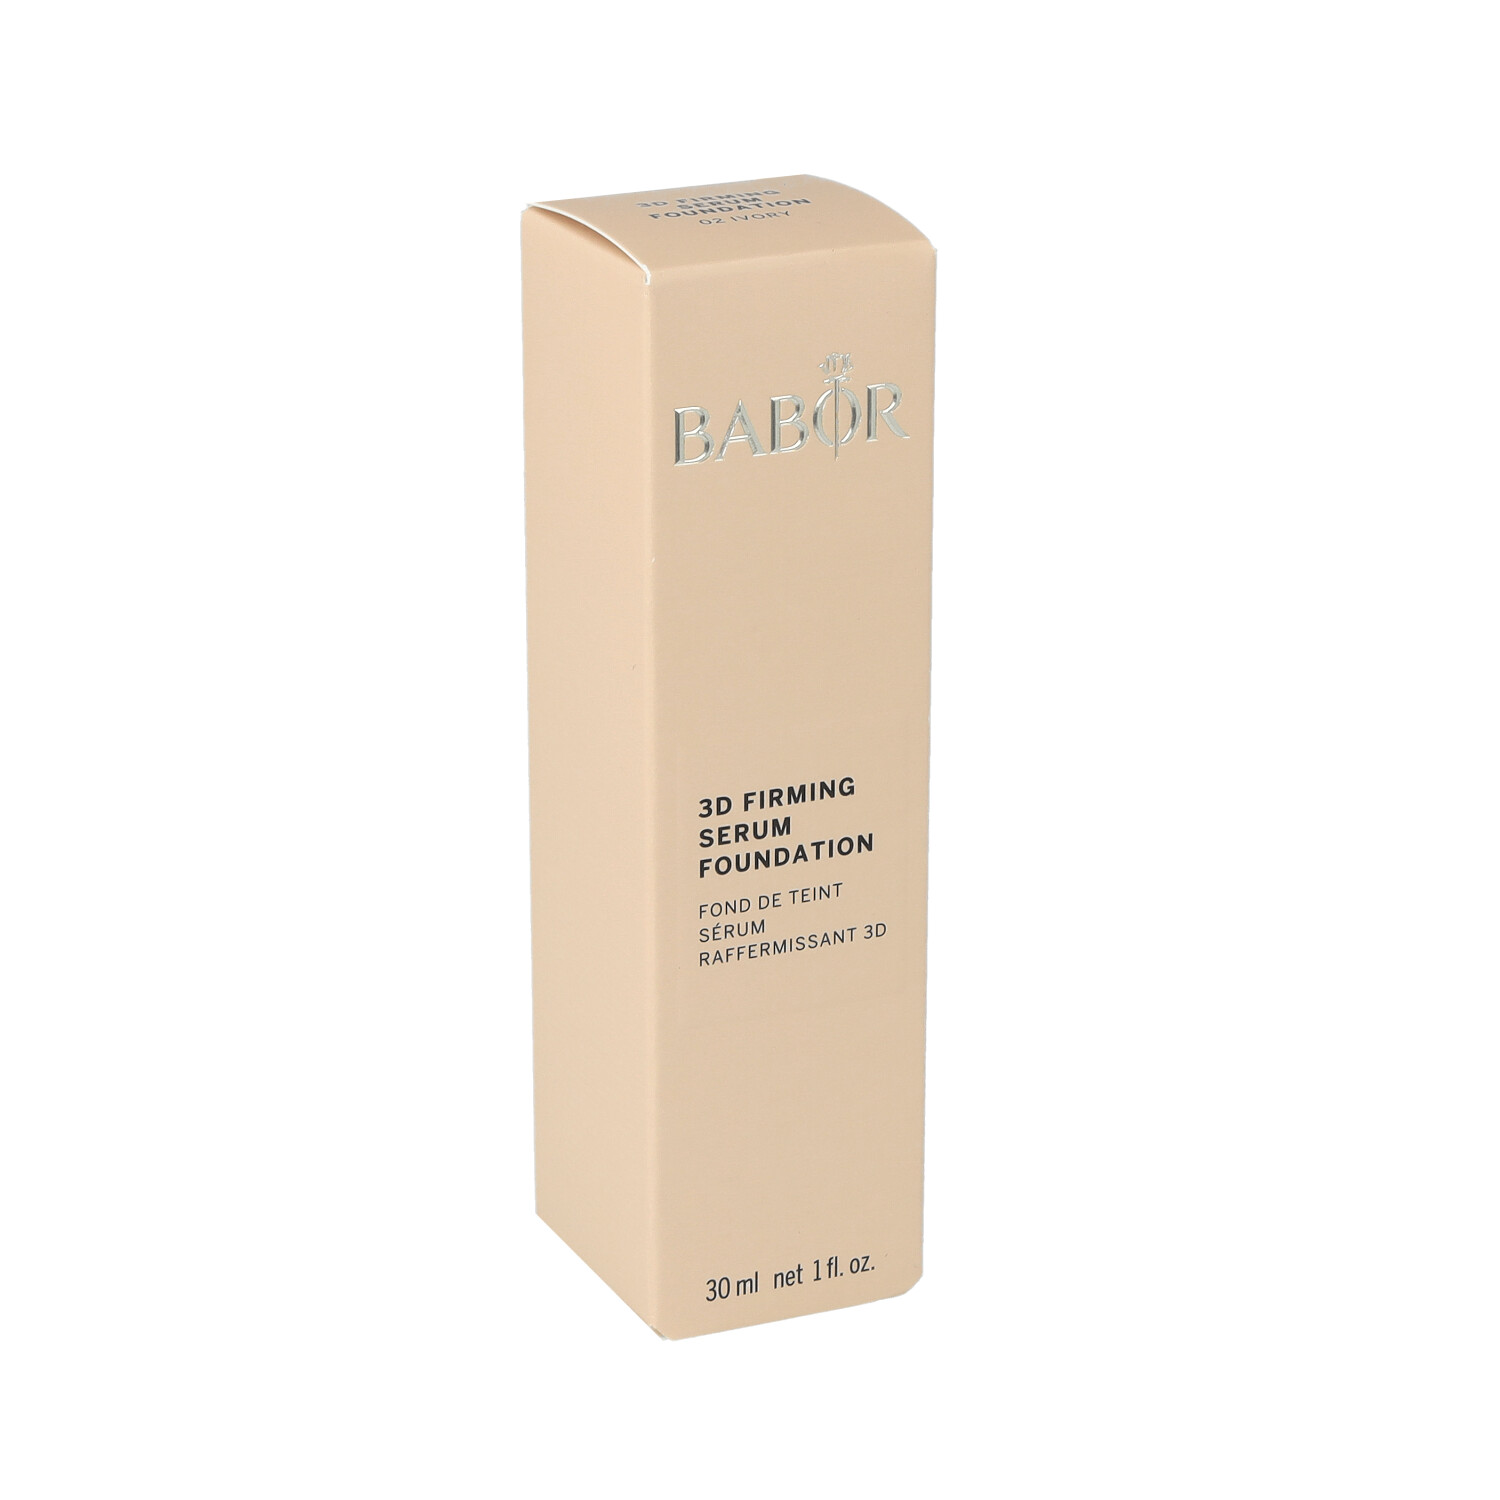 BABOR Collagen Deluxe Foundation 02 ivory